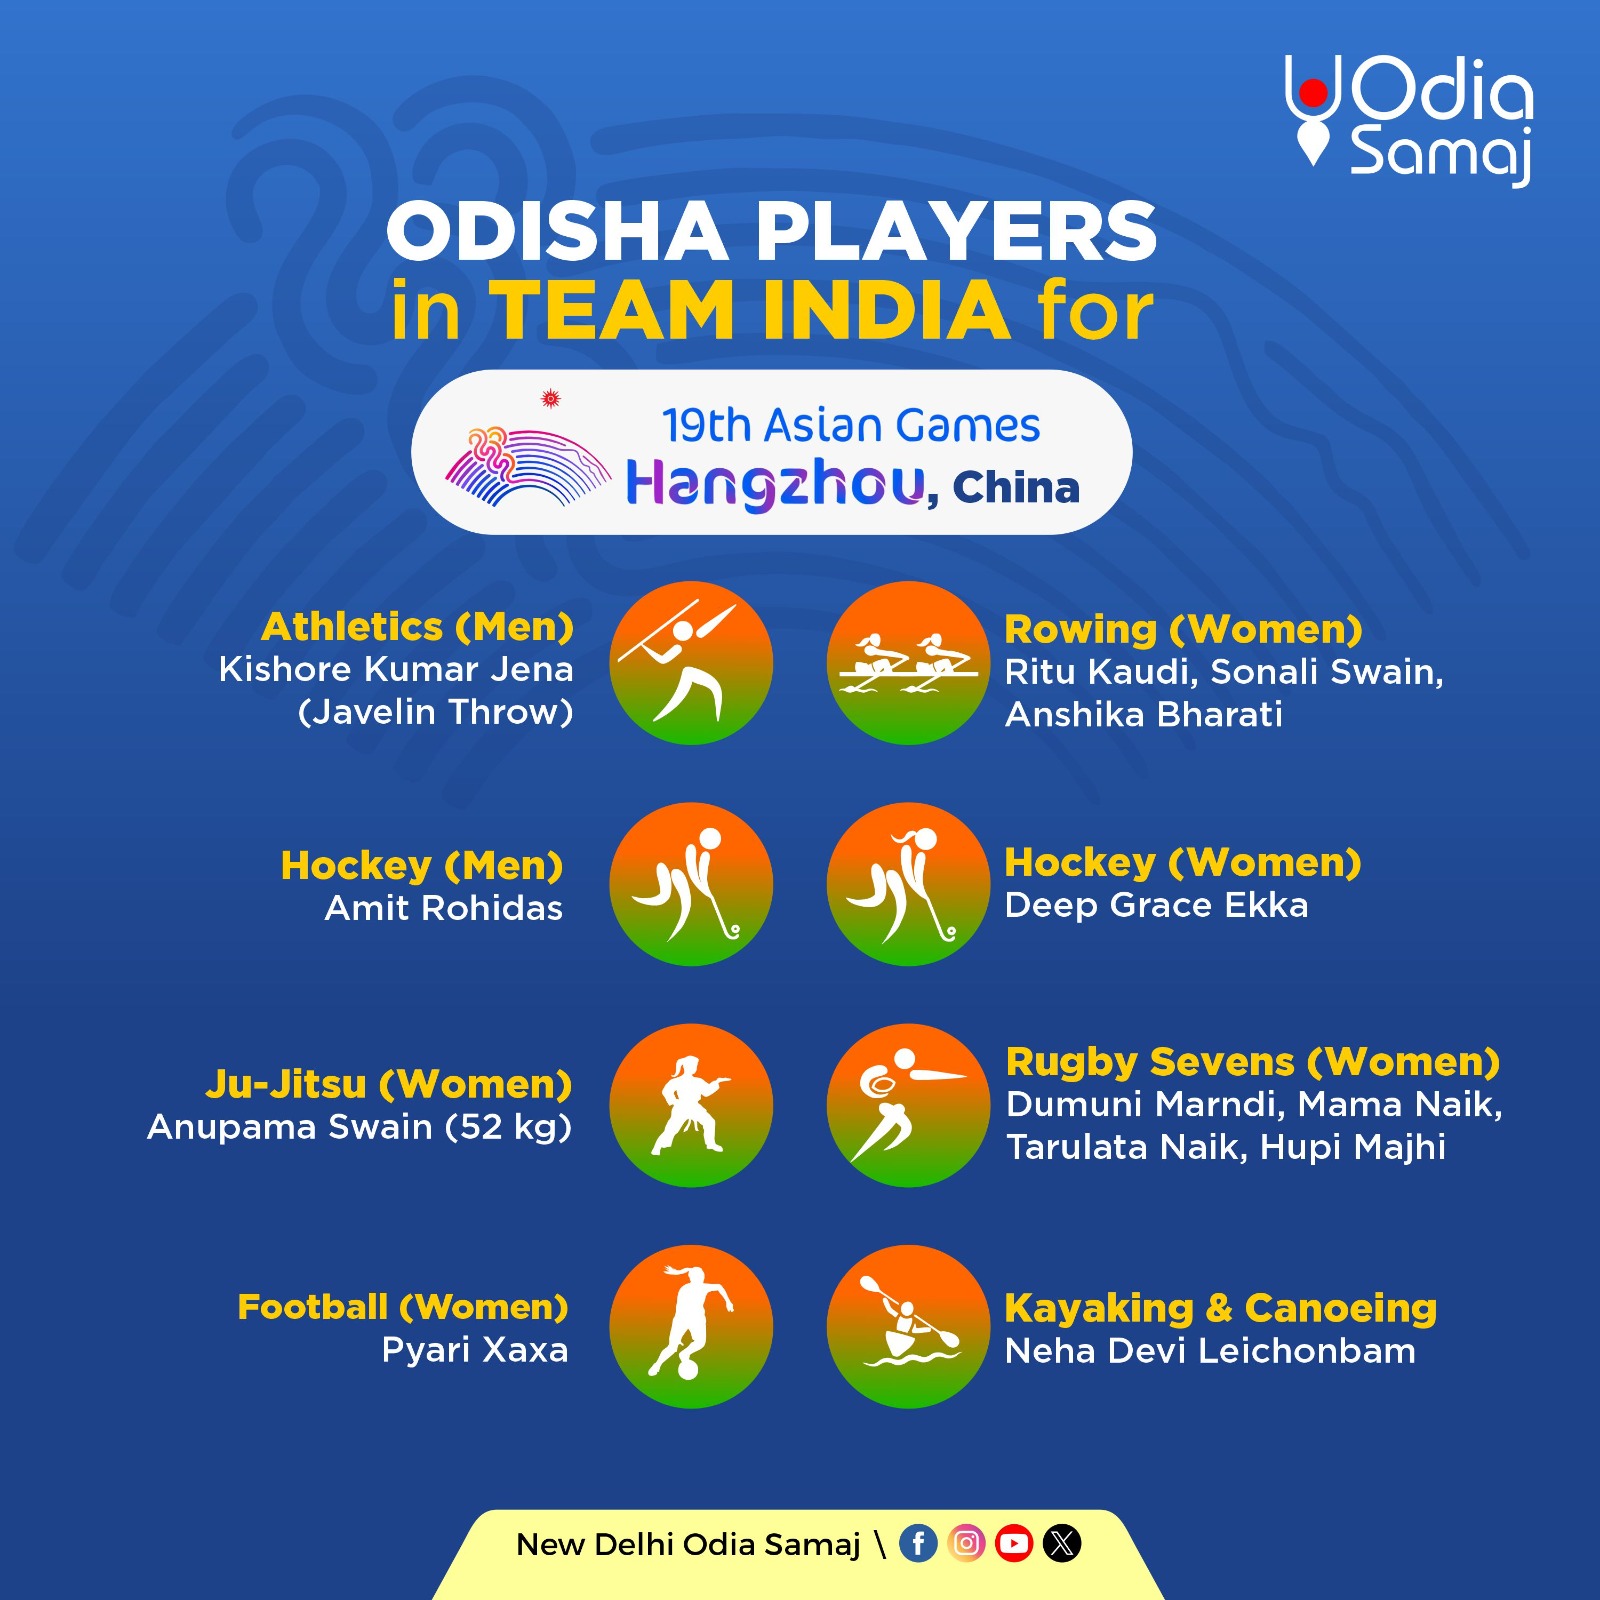  13 players from Odisha to represent India at 19th Asian Games in China